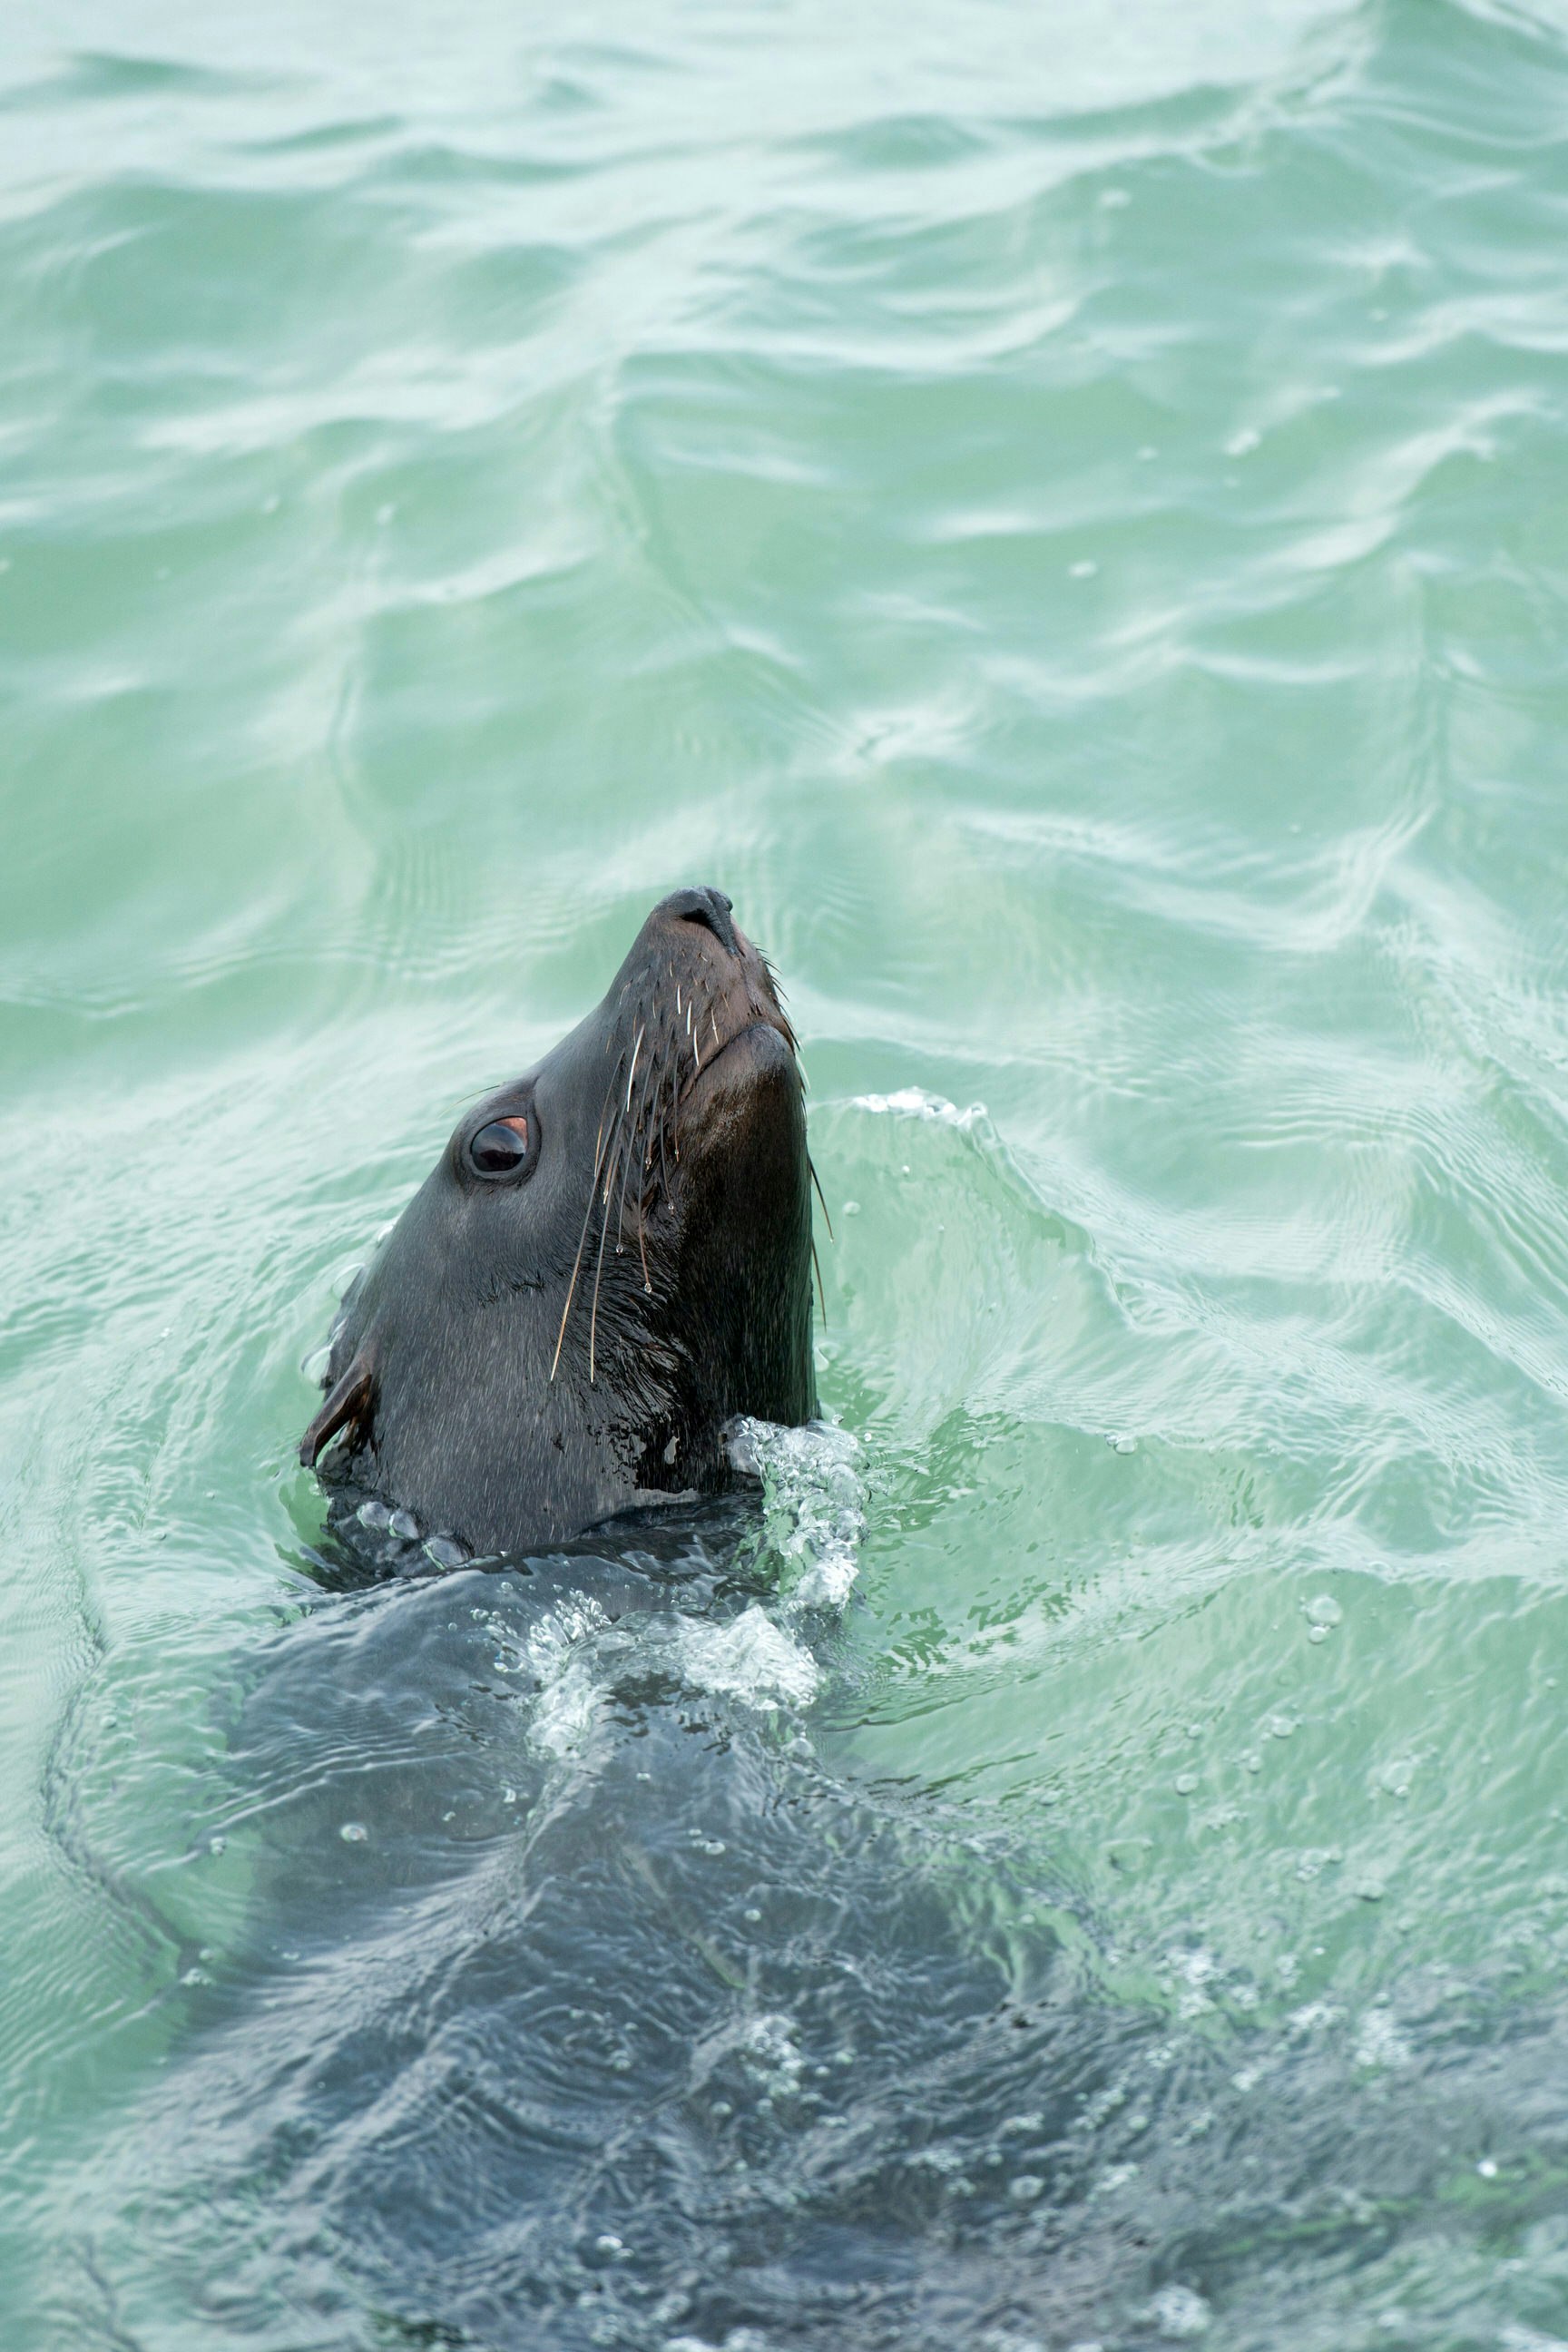 The head of an African fur seal is visible above the surface of the water.